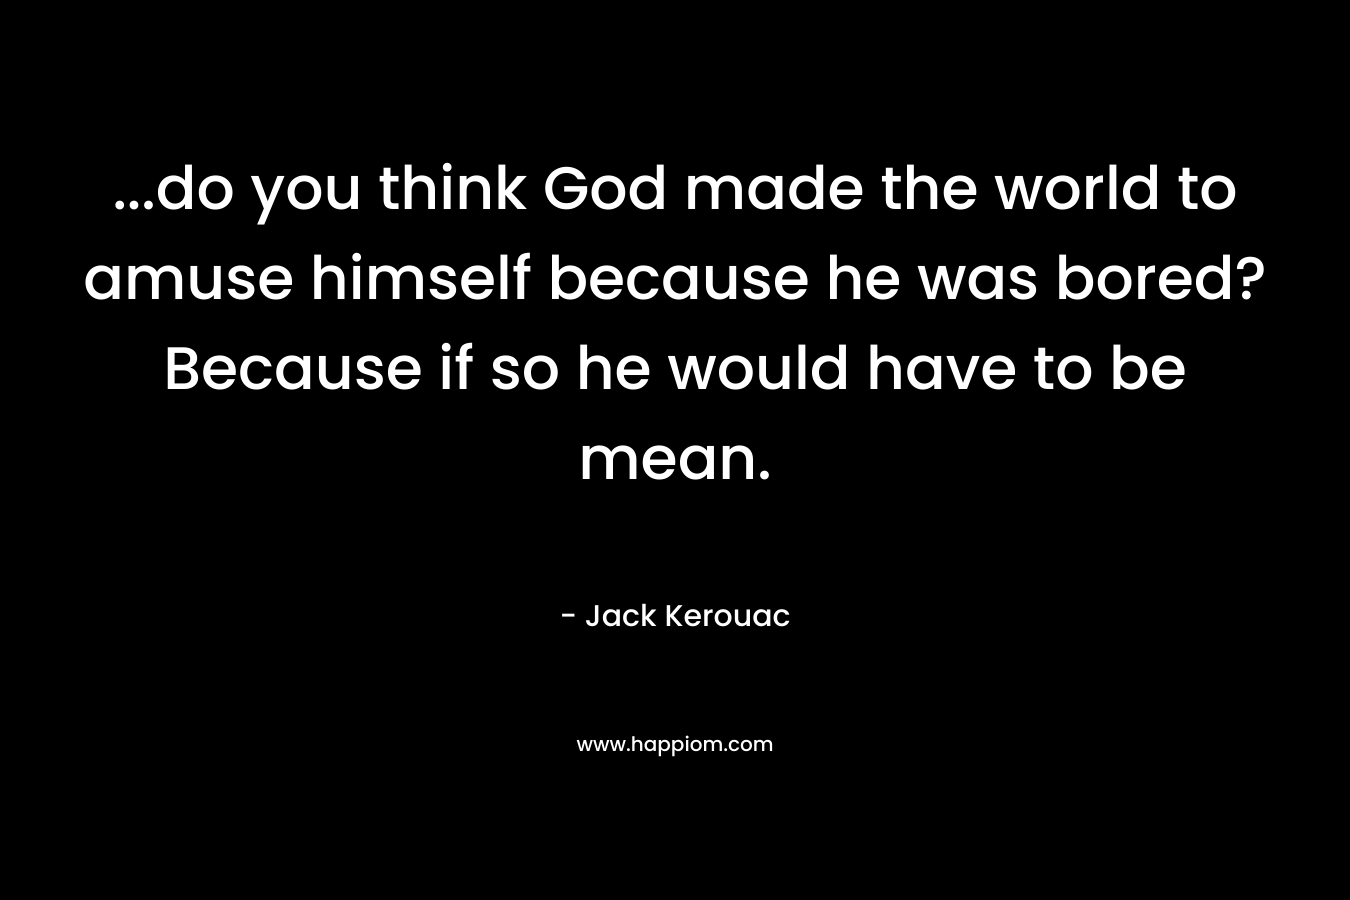 ...do you think God made the world to amuse himself because he was bored? Because if so he would have to be mean.